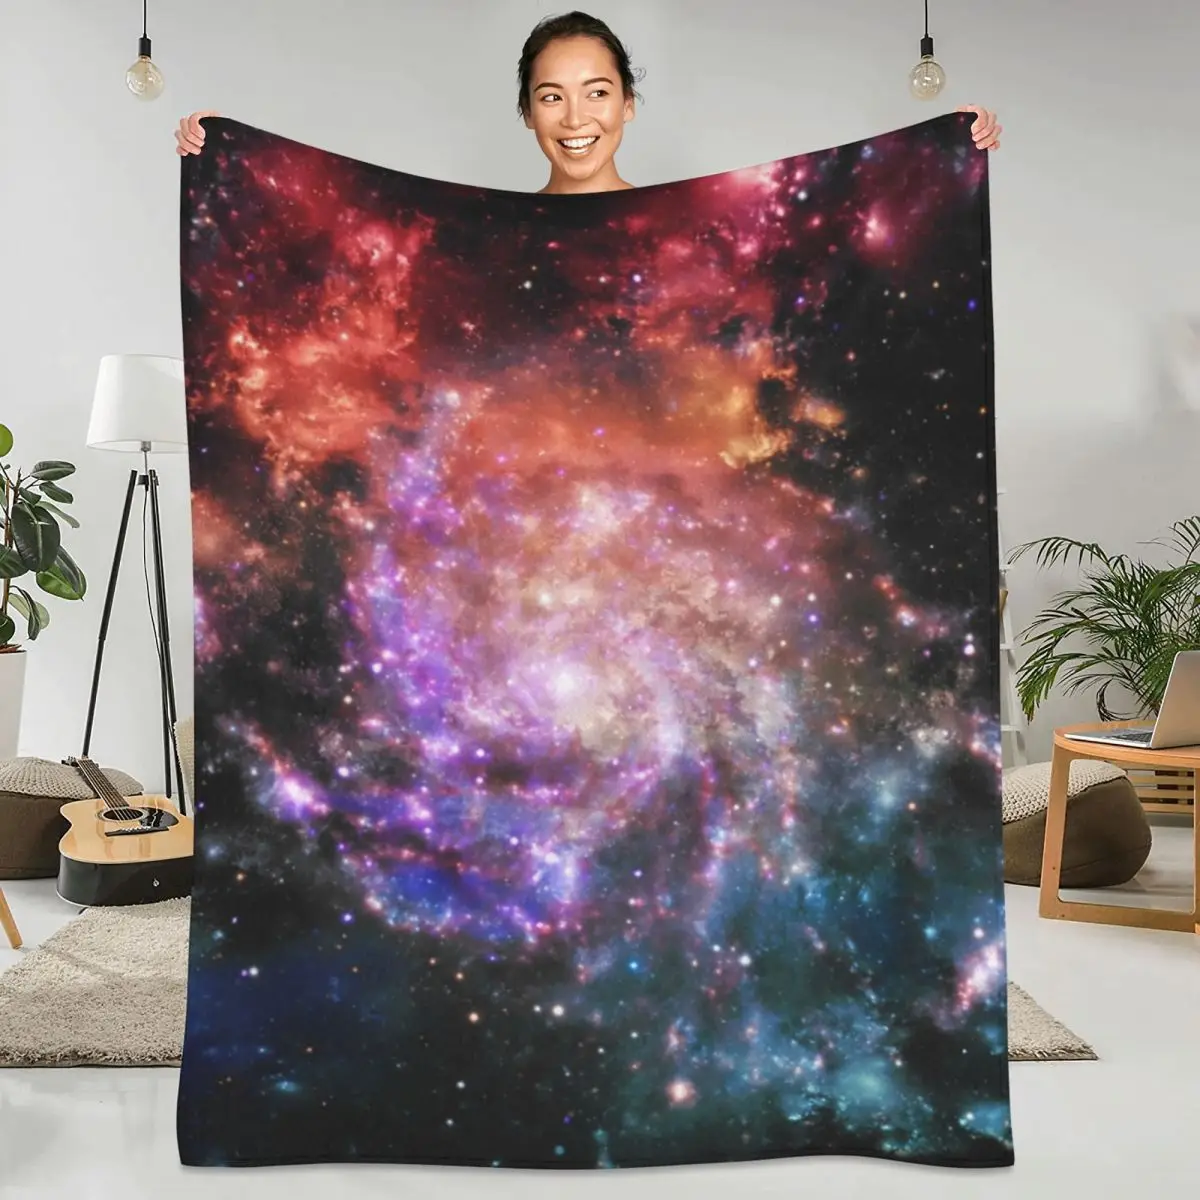 

Galaxy Art Super Soft Blanket Print Outer Space Picnic Bedding Throws Winter Print Design Flannel Bedspread Sofa Bed Cover